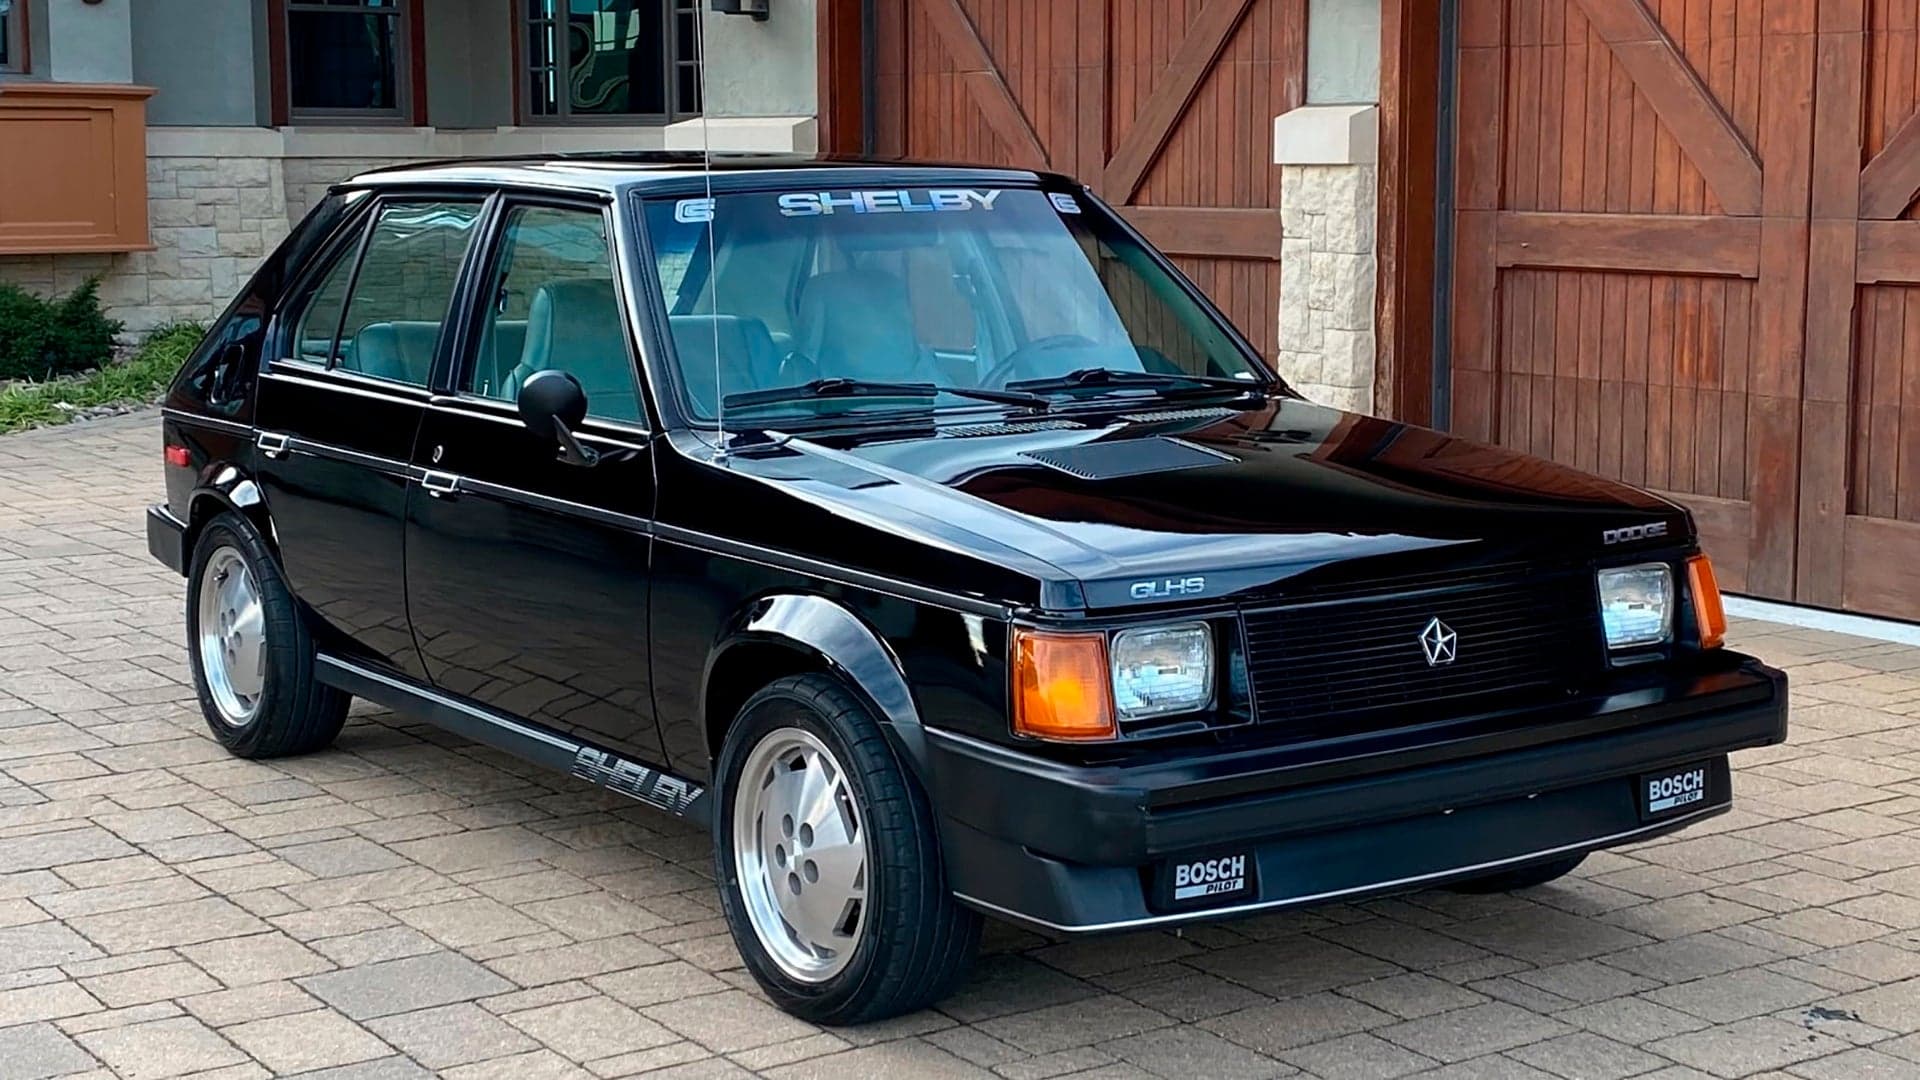 Carroll Shelby’s Own 1986 Dodge Shelby Omni GLHS Is the Vintage Hot Hatch to Buy